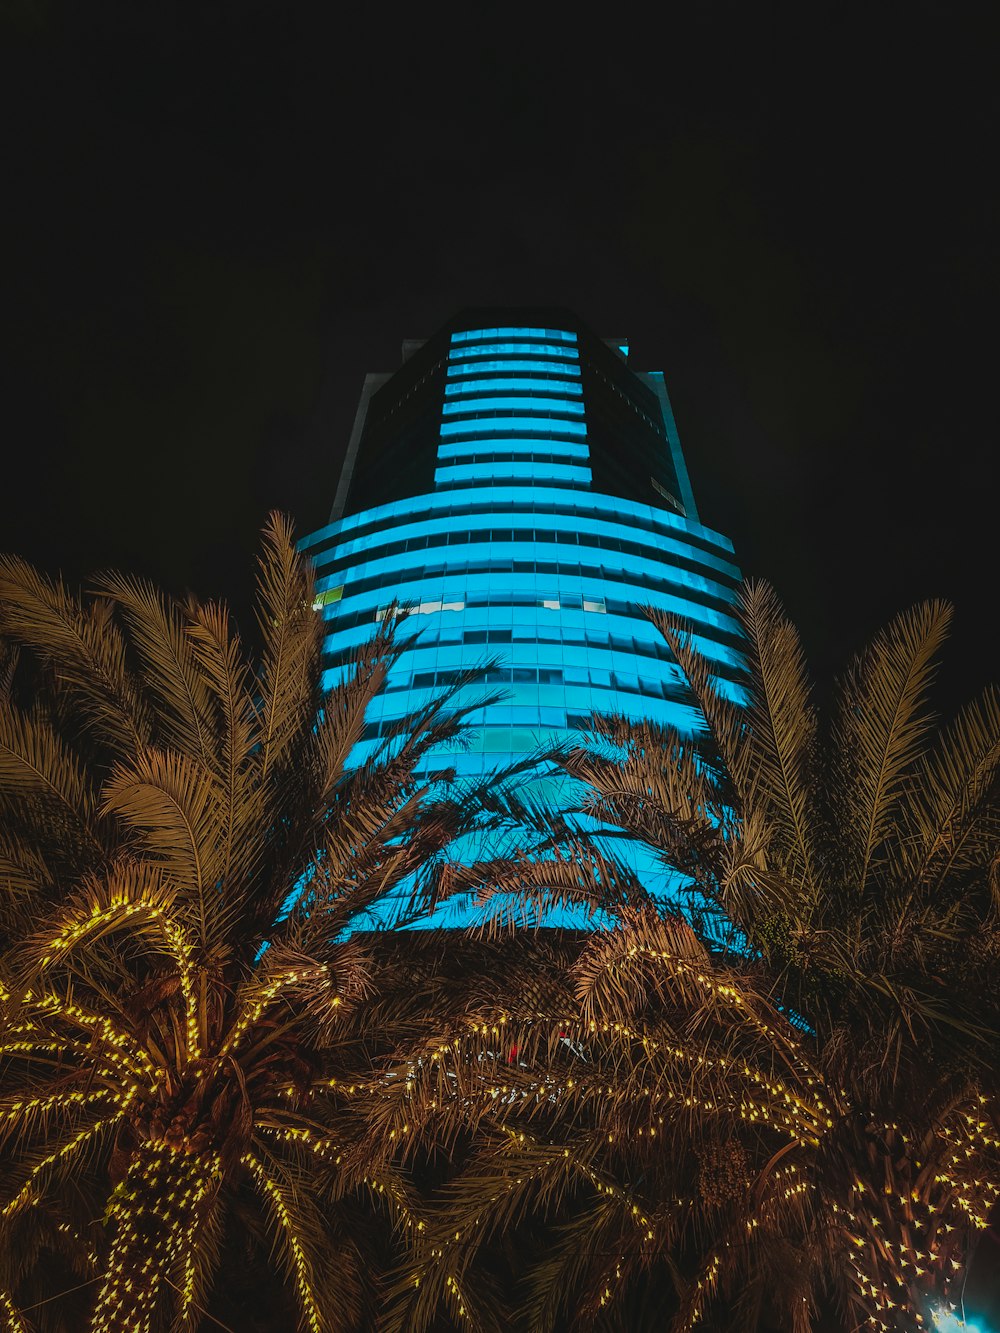 a tall building lit up with blue lights